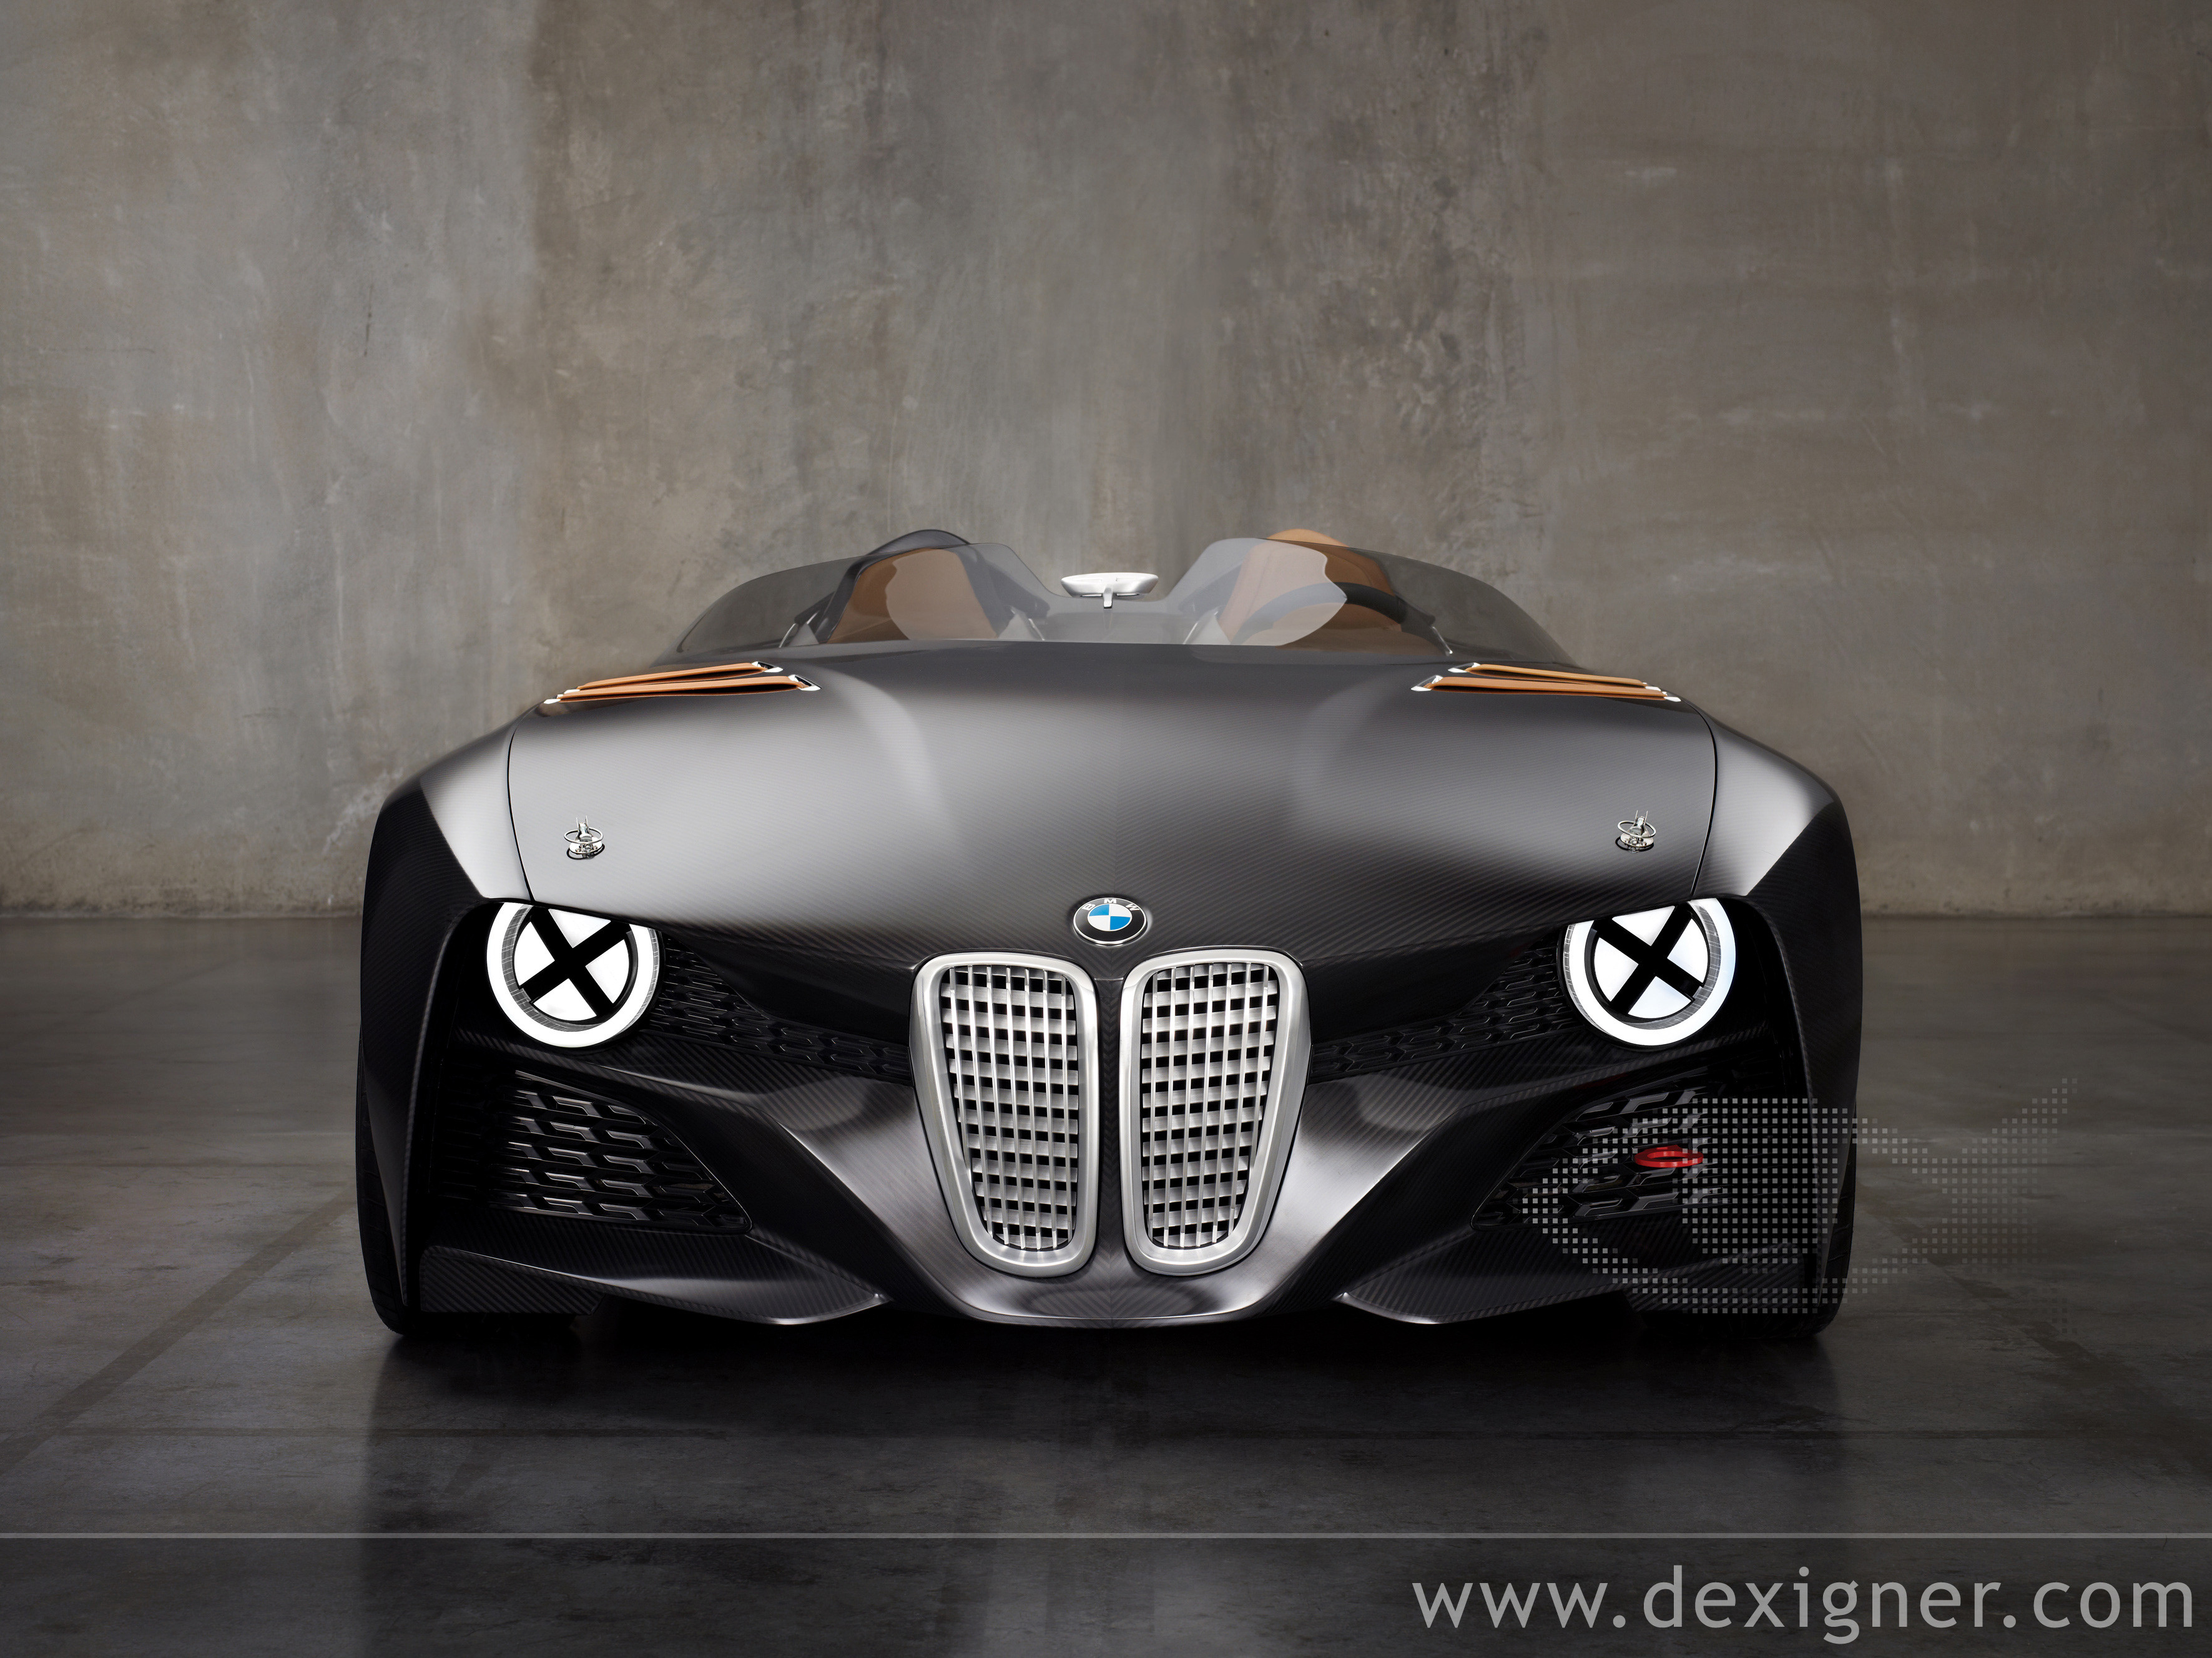 With these characteristics, the BMW 328 was even then the embodiment of what